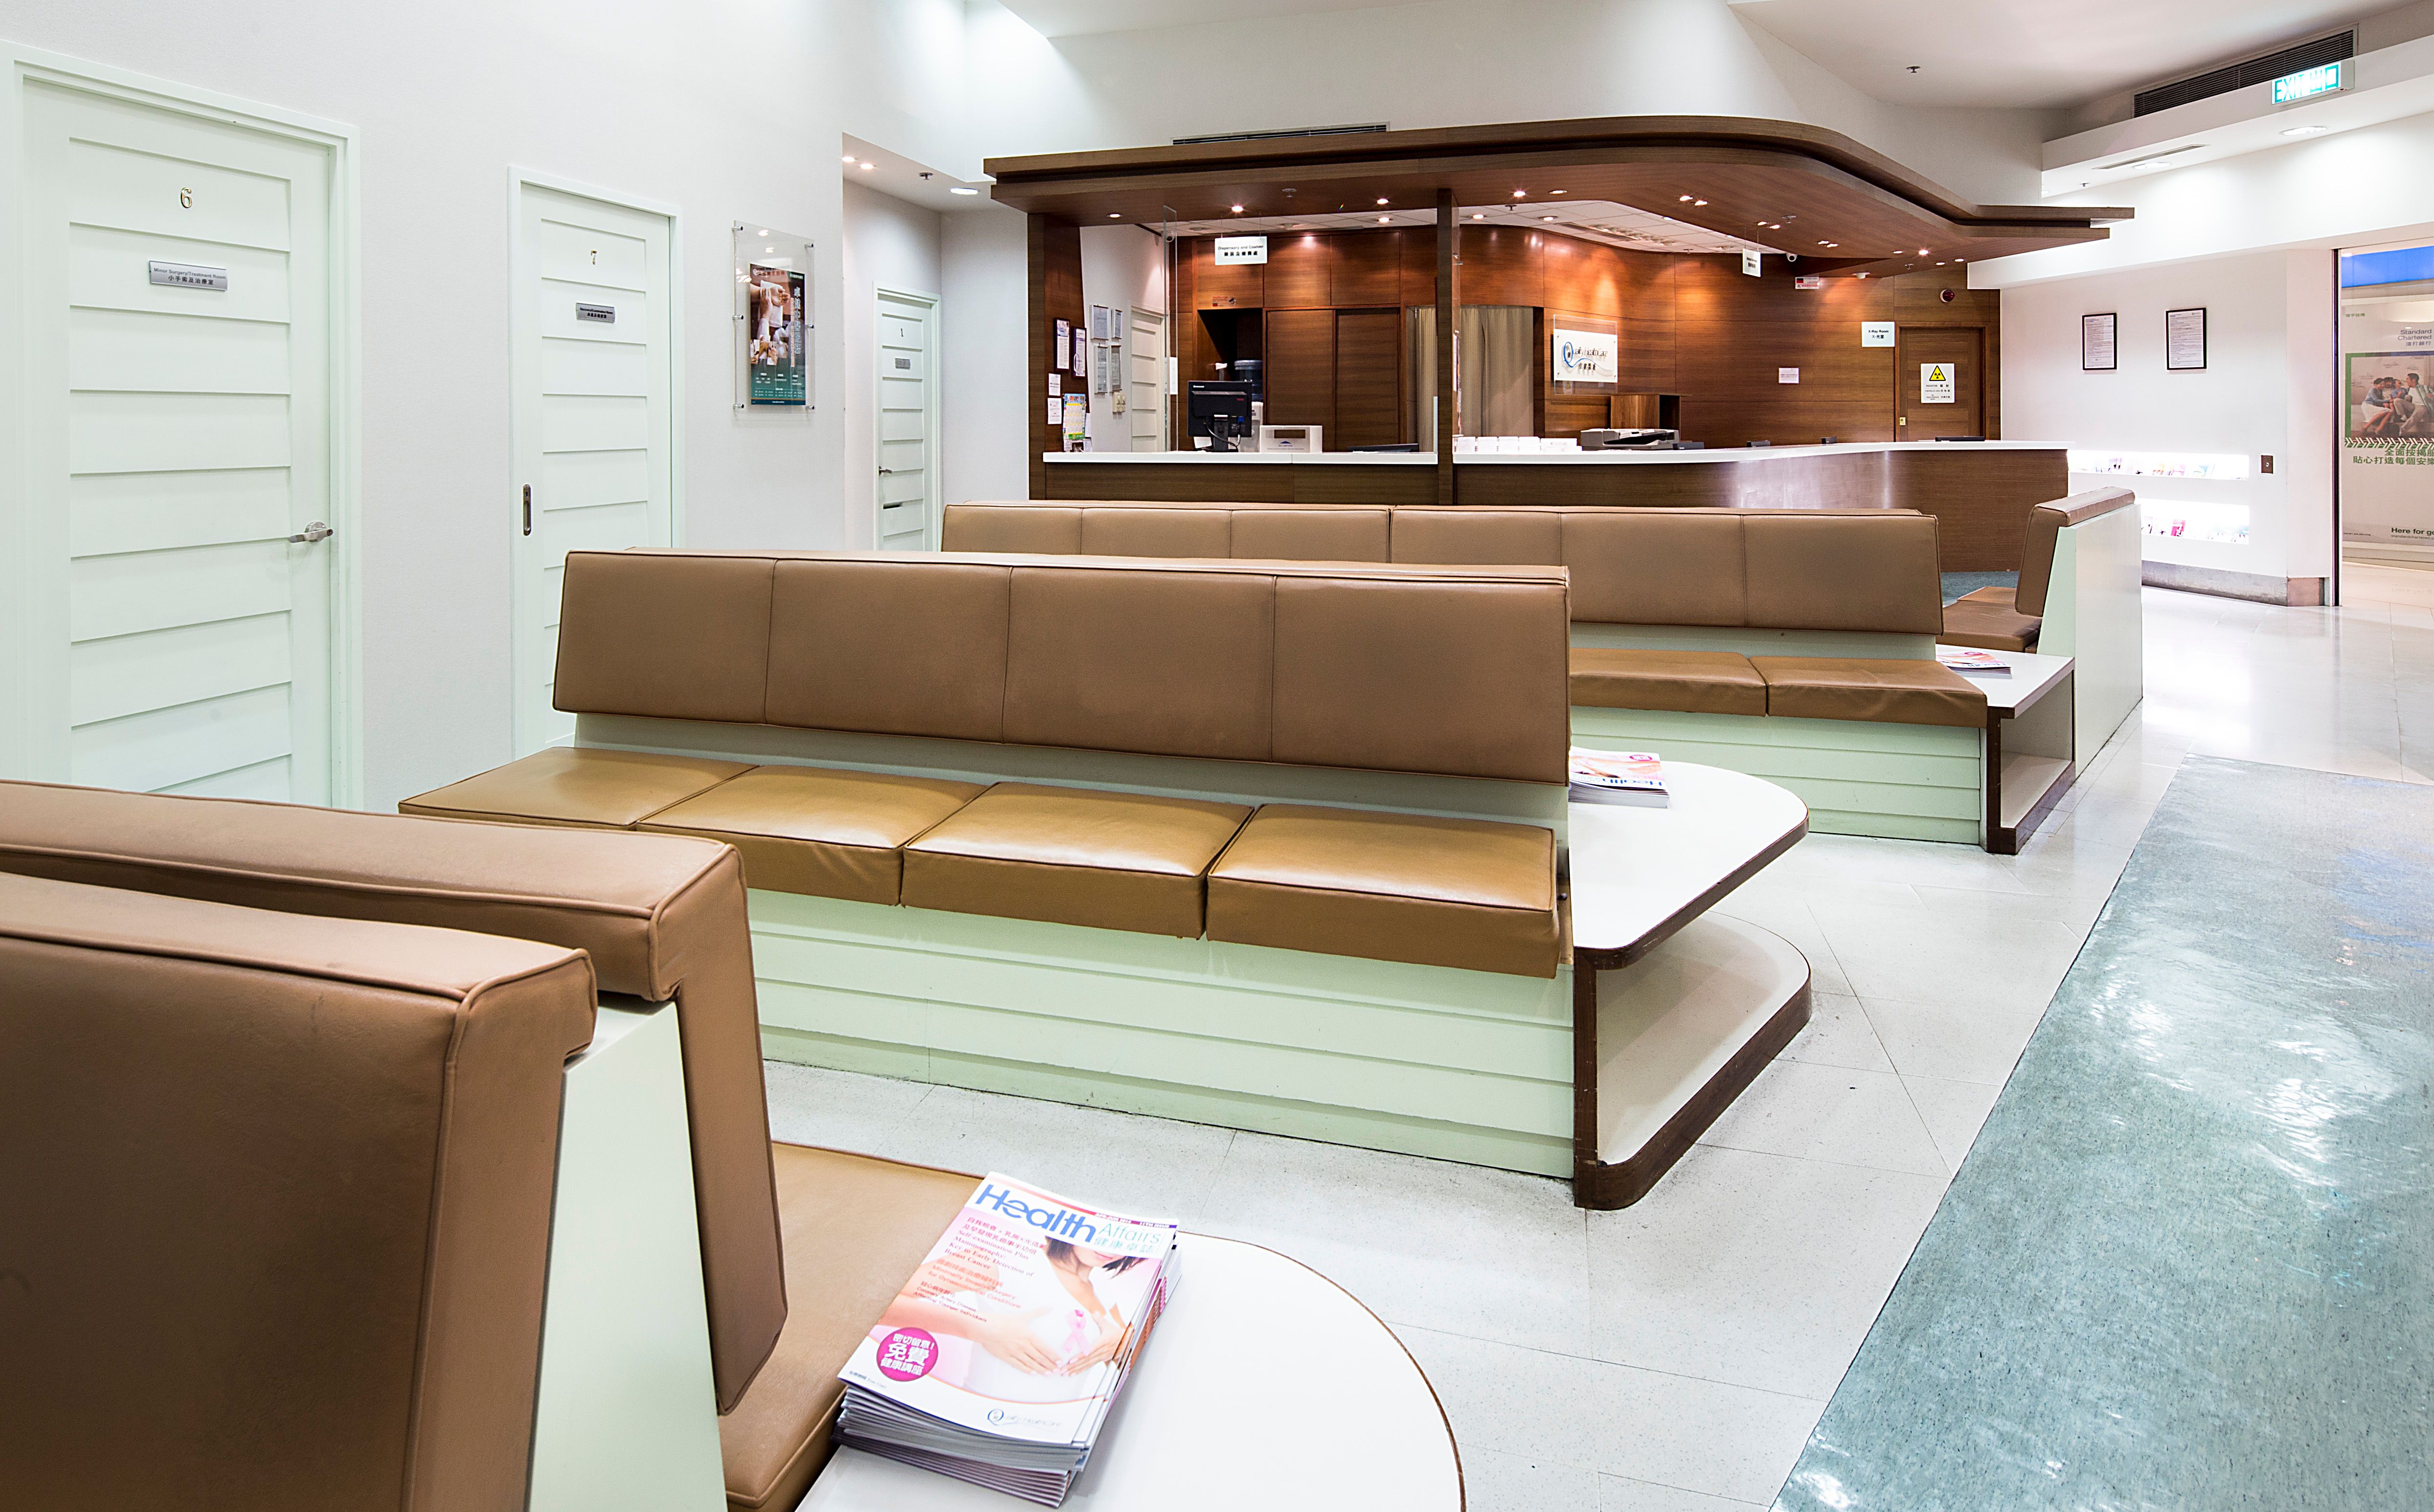 Quality HealthCare Medical Centre waiting area